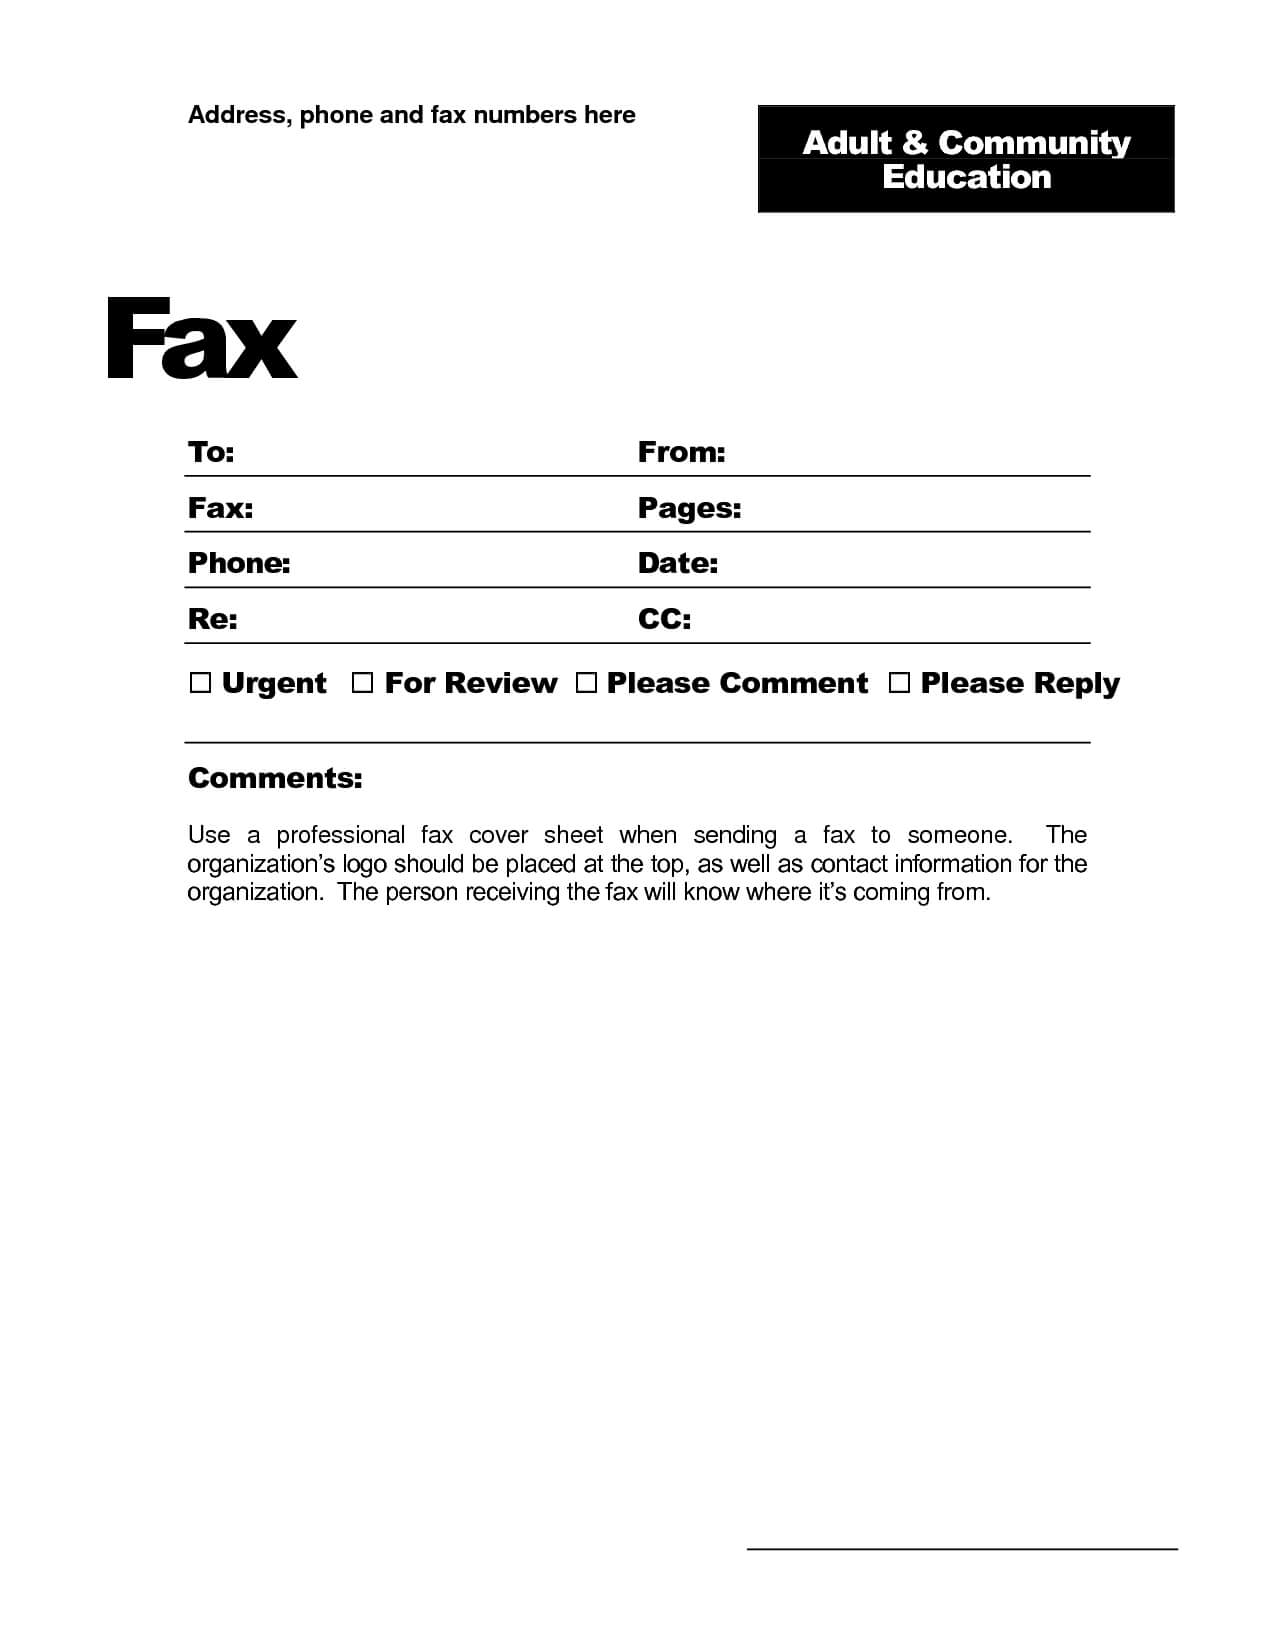 Fax Template Word 2010 – Free Download With Regard To Fax Template Word 2010